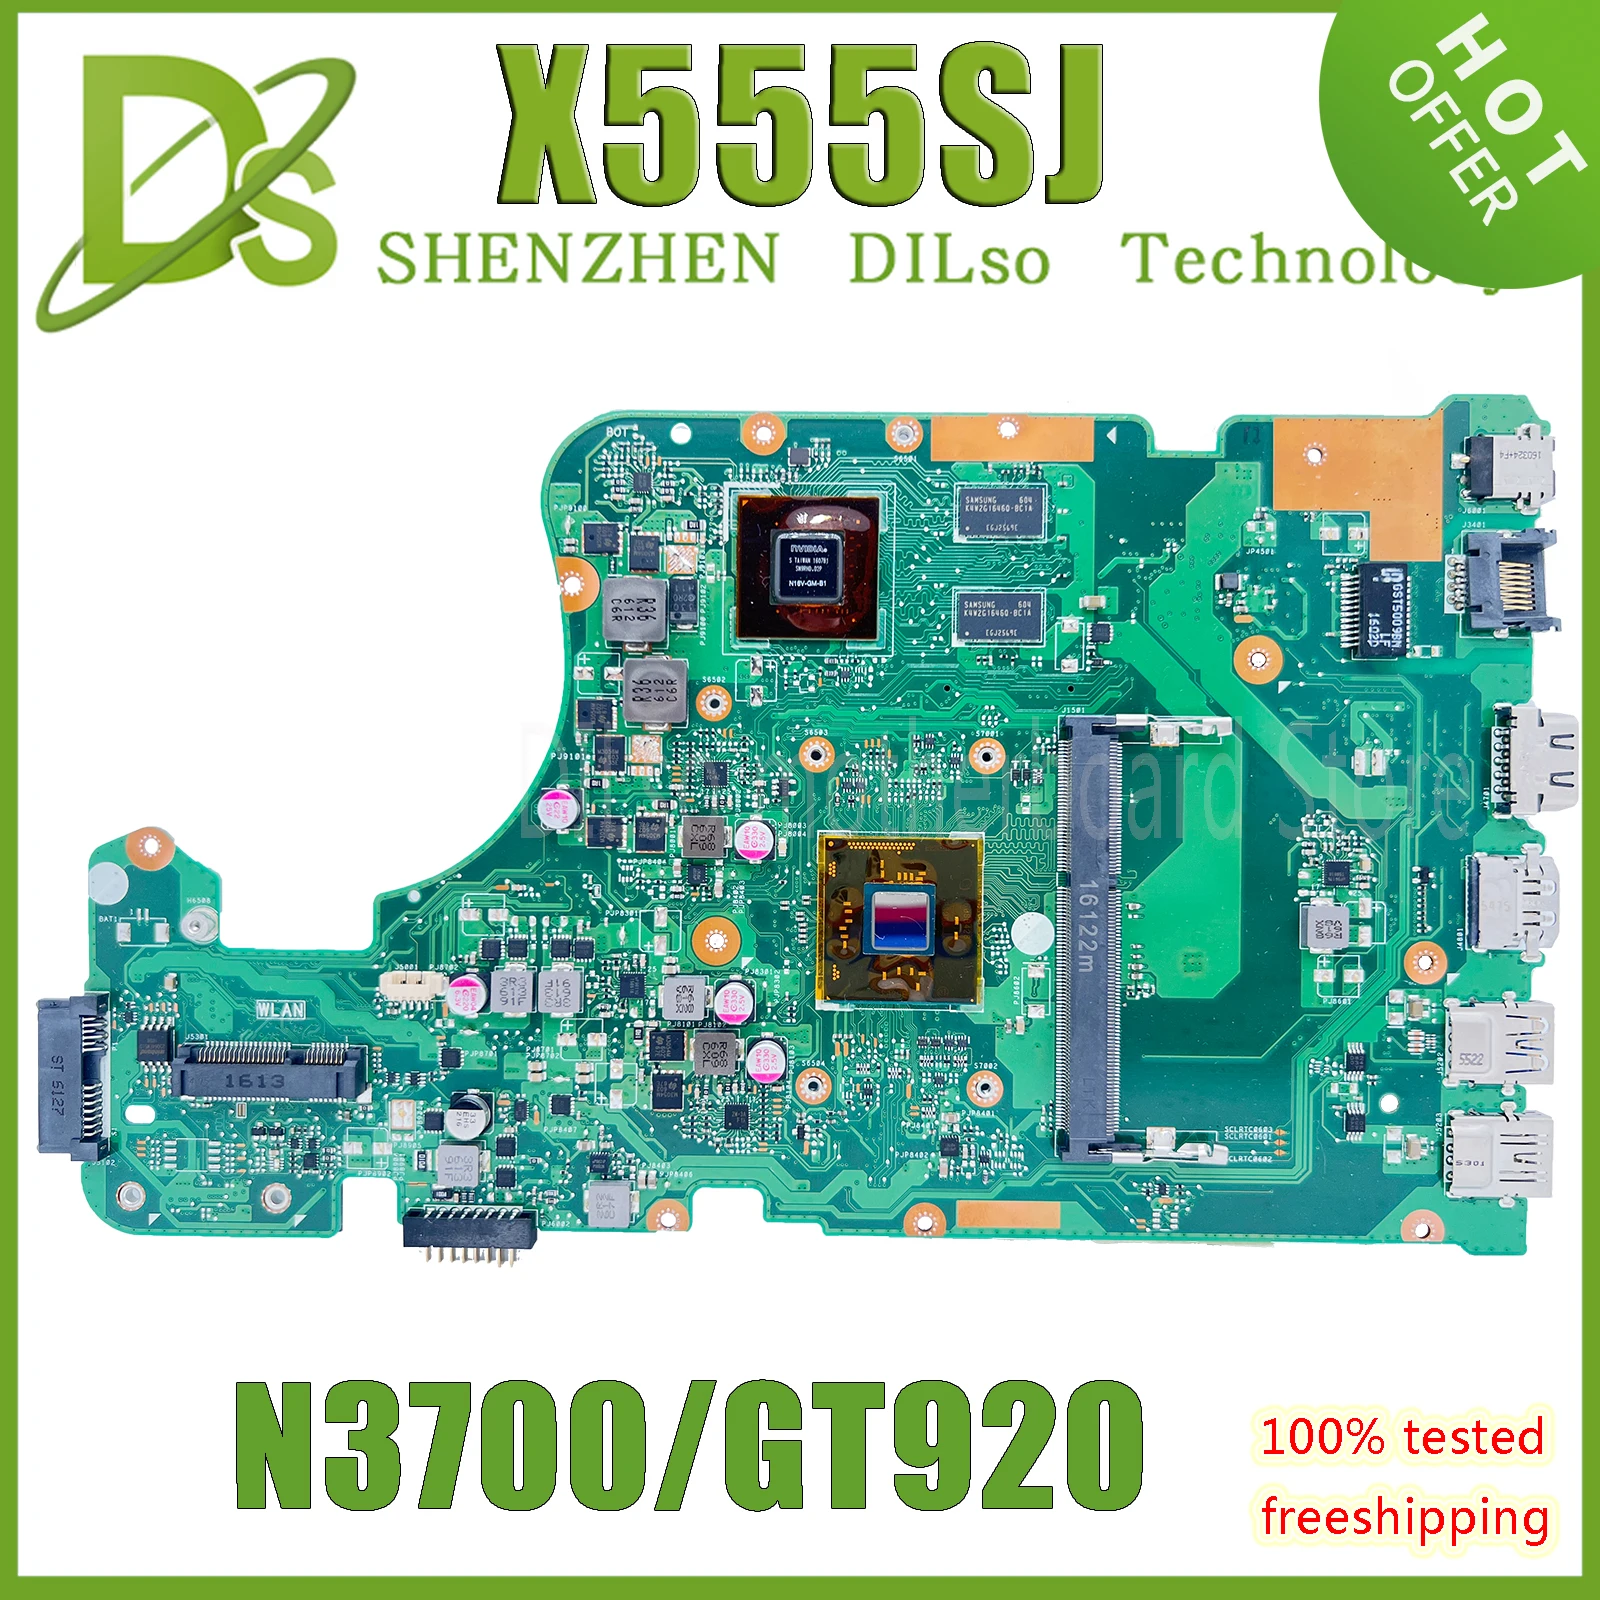 Enlarge KEFU X555SJ  CPU N3700U GT920M  mainboard For Asus X555S X555SJ X555 A555 A555S Laptop Motherboard Tested Working free shipping